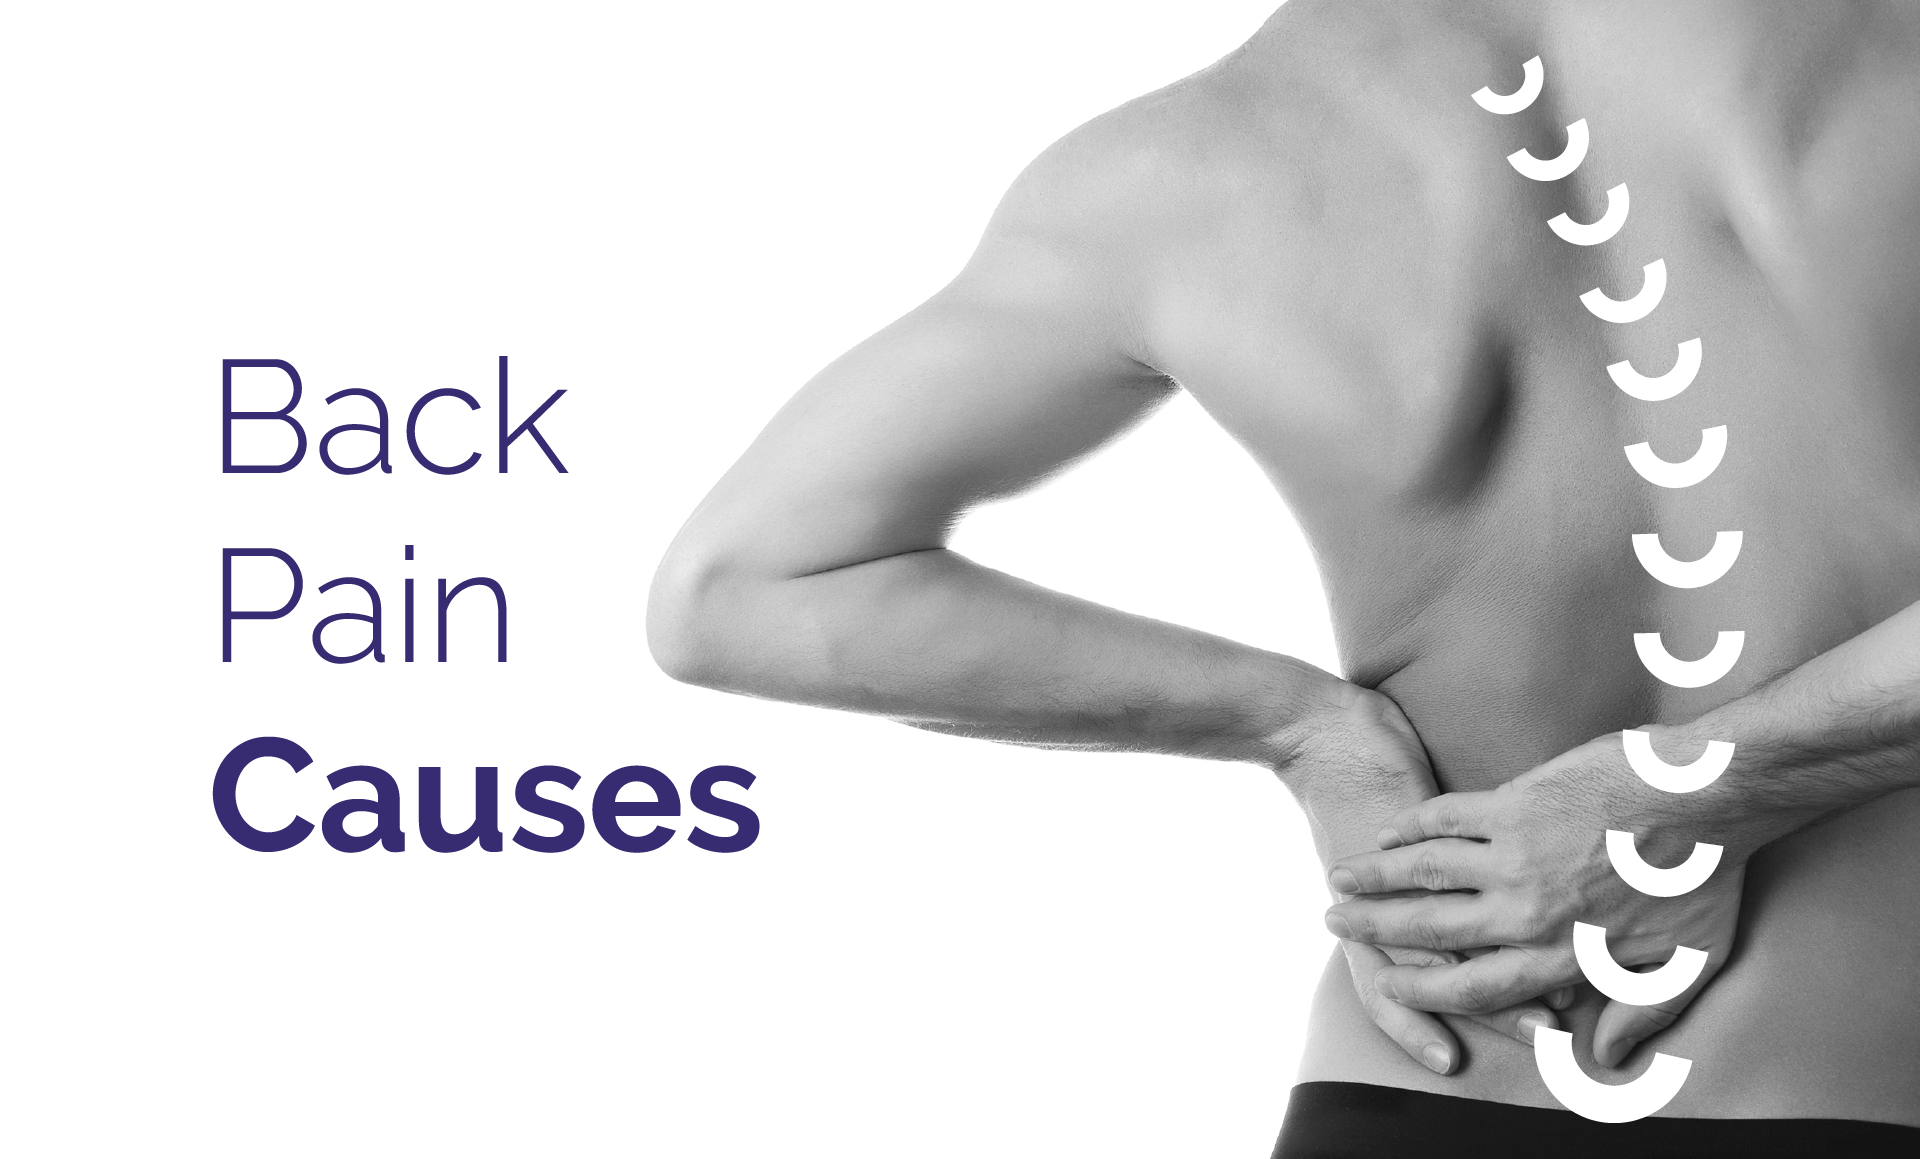 Why Does My Lower Back Hurt Every Day? Causes, Treatments & When to See a Doctor